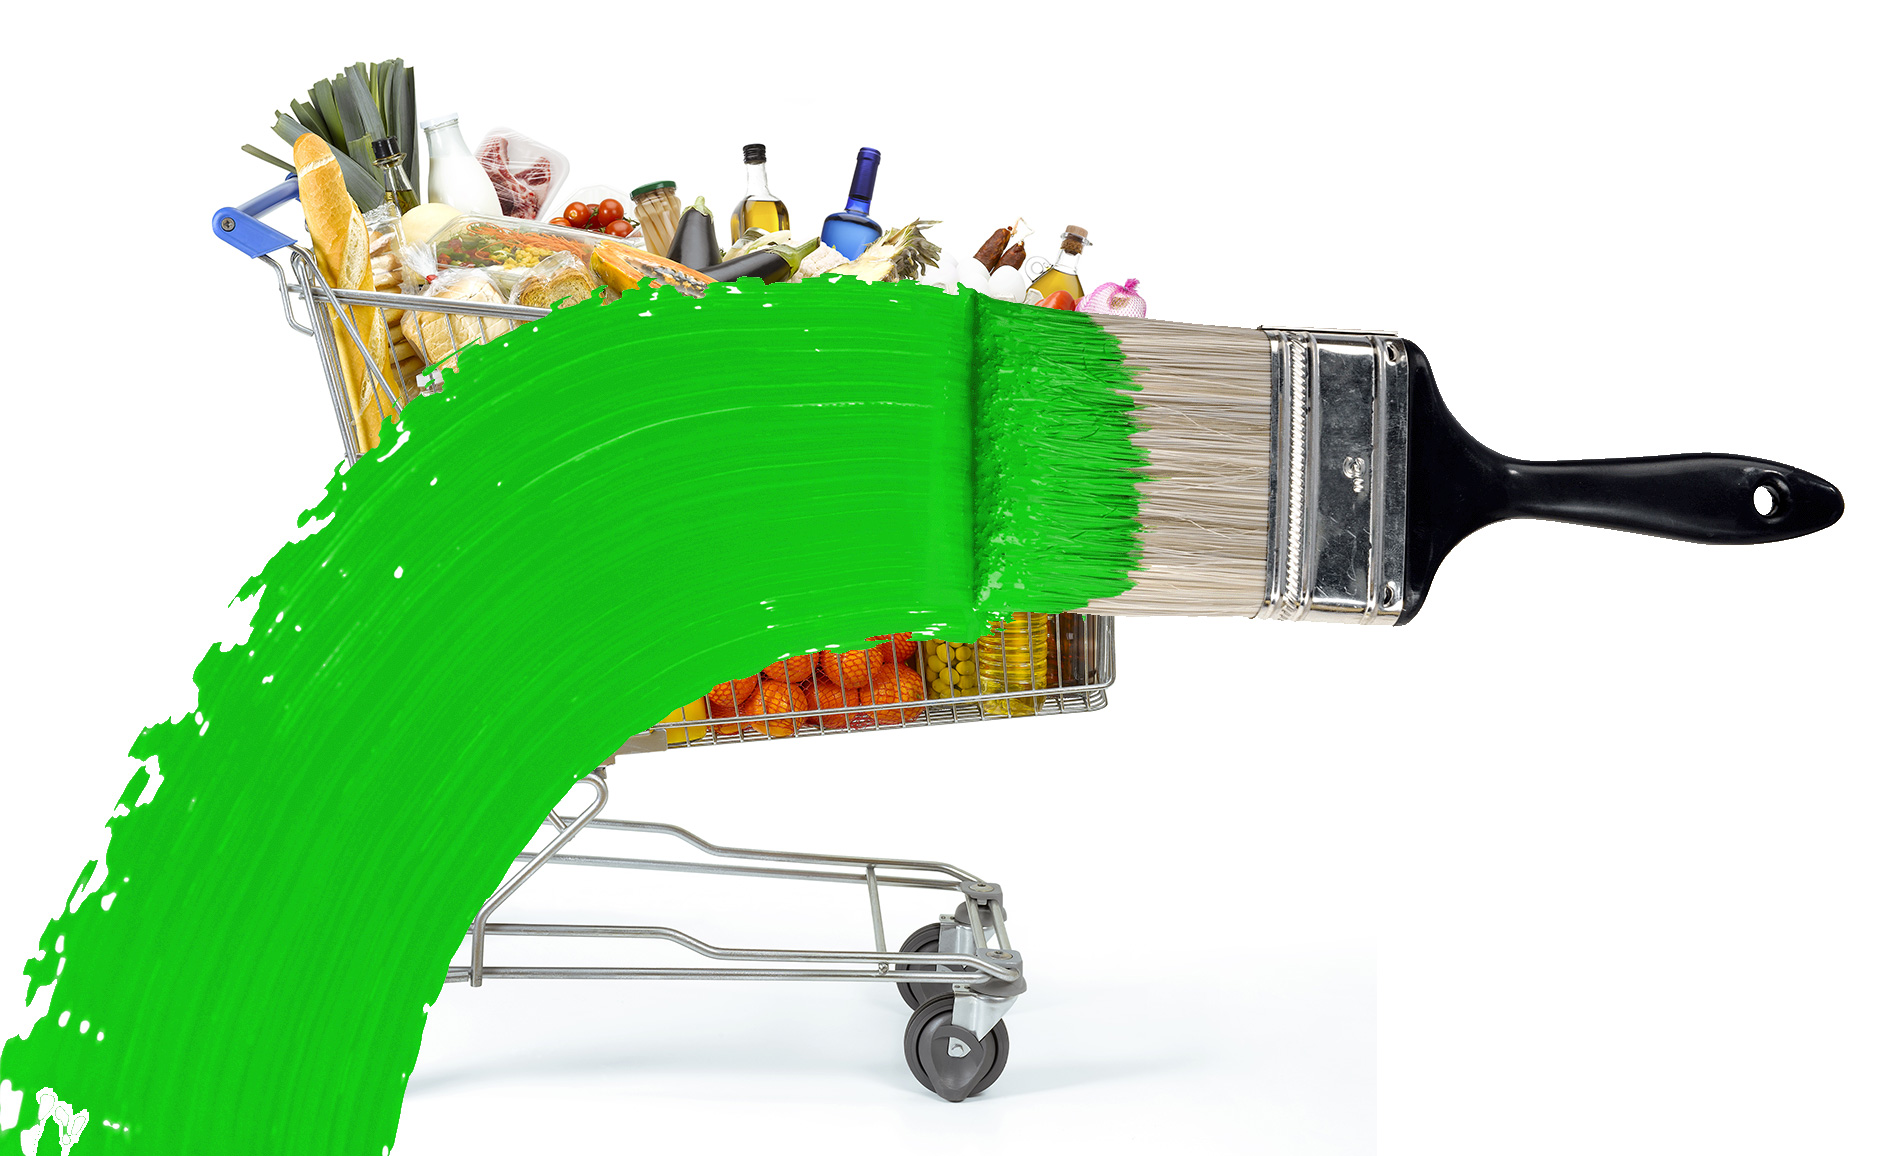 Greenwashing image from greenbiz website. Paintbrush covering a trolley of groceries with a stripe of green paint